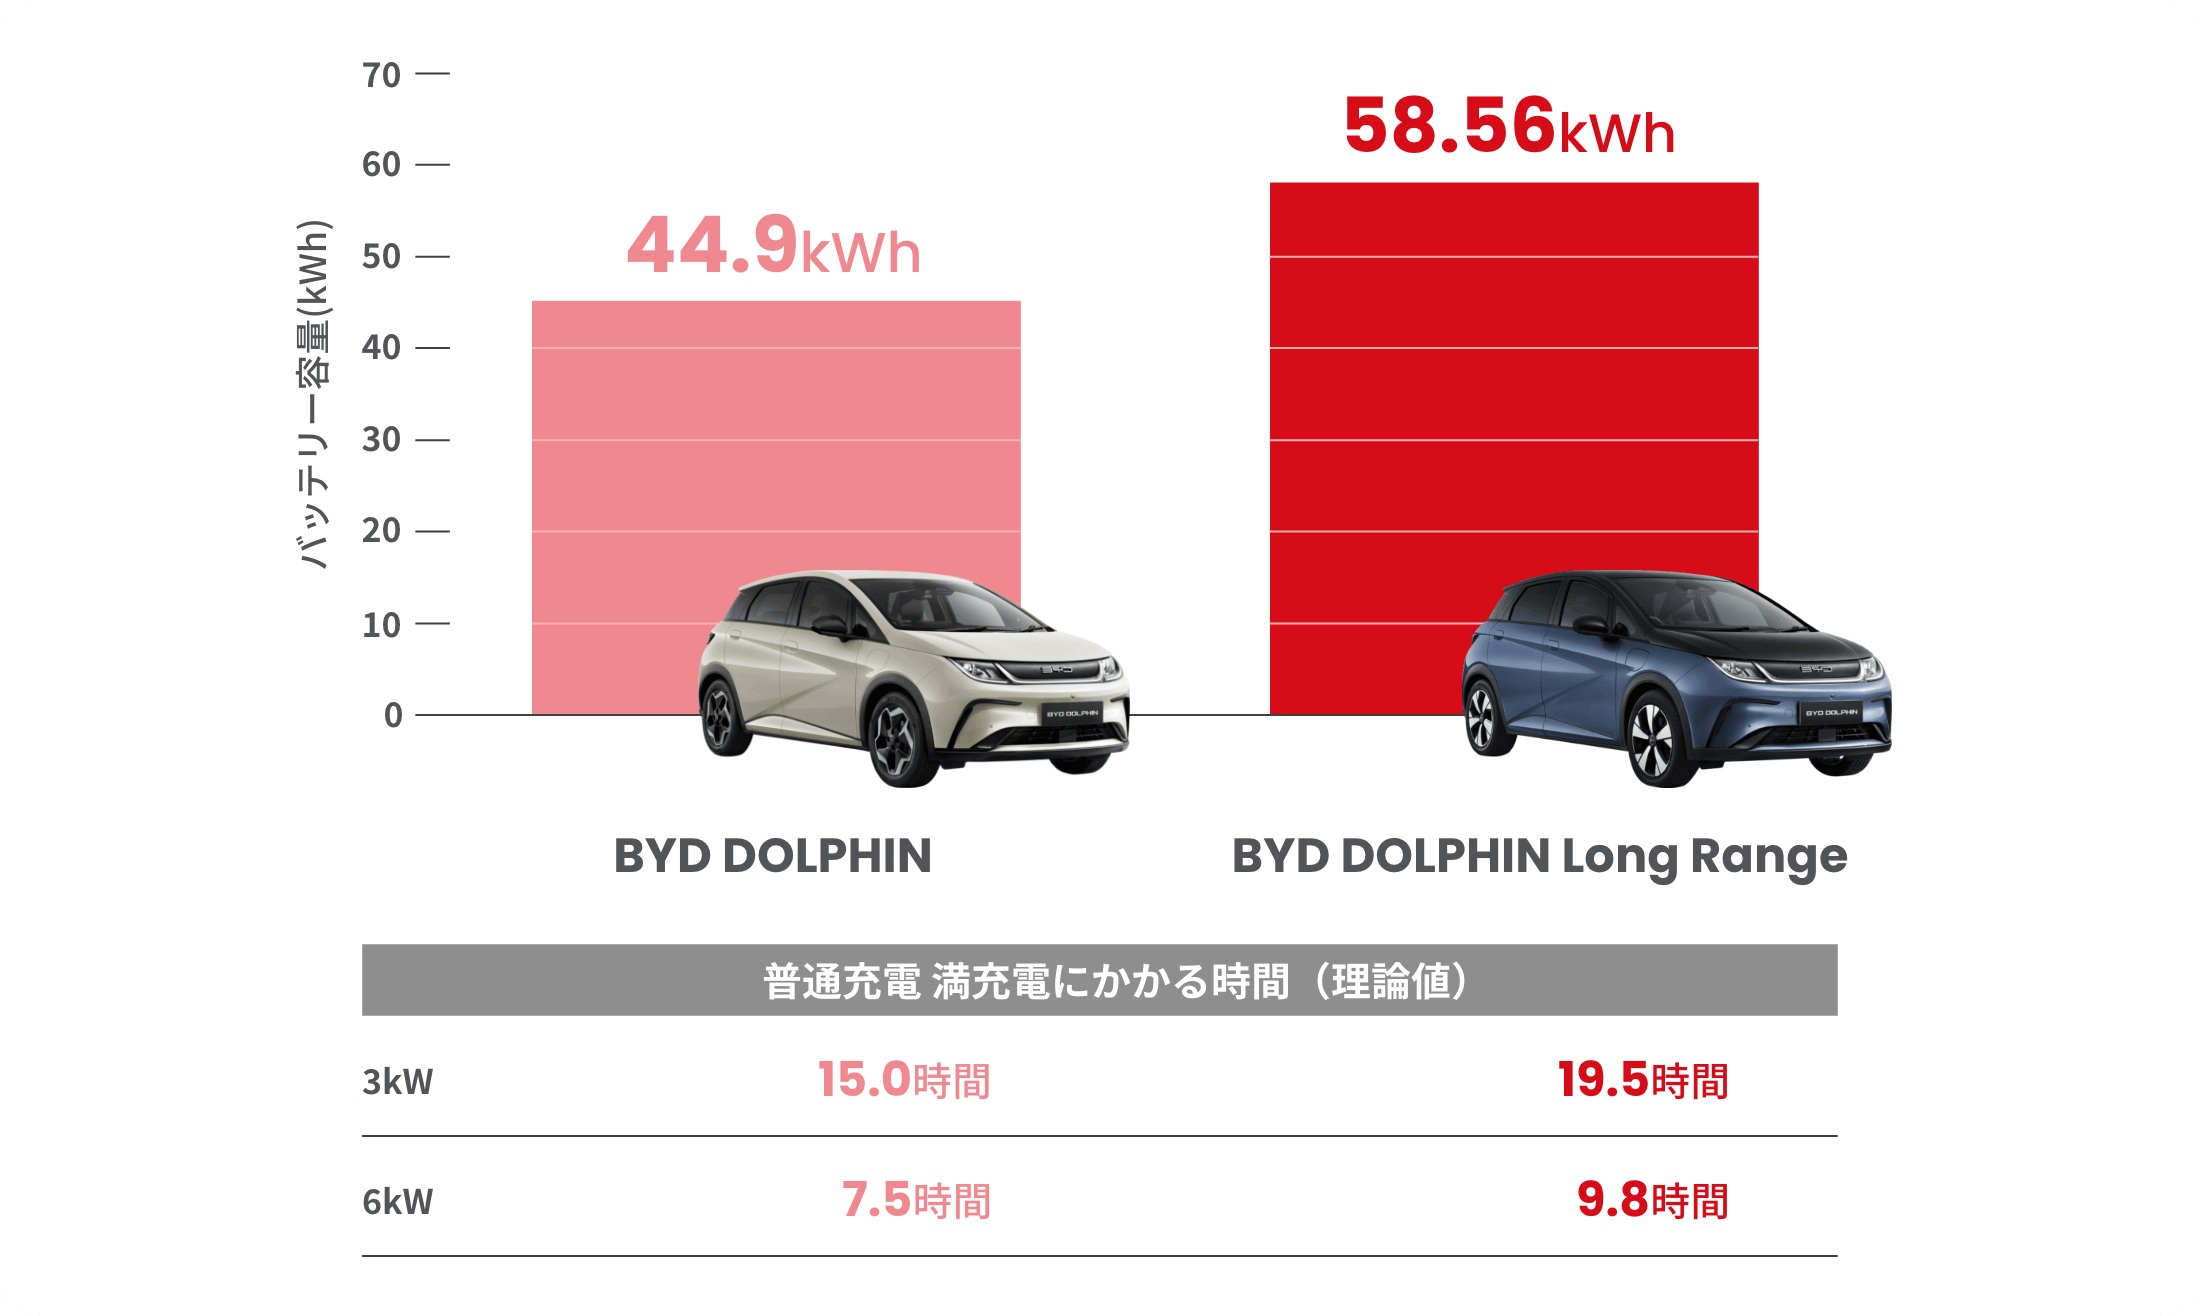 BYD DOLPHIN→バッテリー容量：44.9kWh、普通充電による満充電にかかる時間：3kWh15時間・6kWh7.5時間 / BYD DOLPHIN Long Range→バッテリー容量：58.56kWh、普通充電による満充電にかかる時間：3kWh19.5時間・6kWh9.8時間